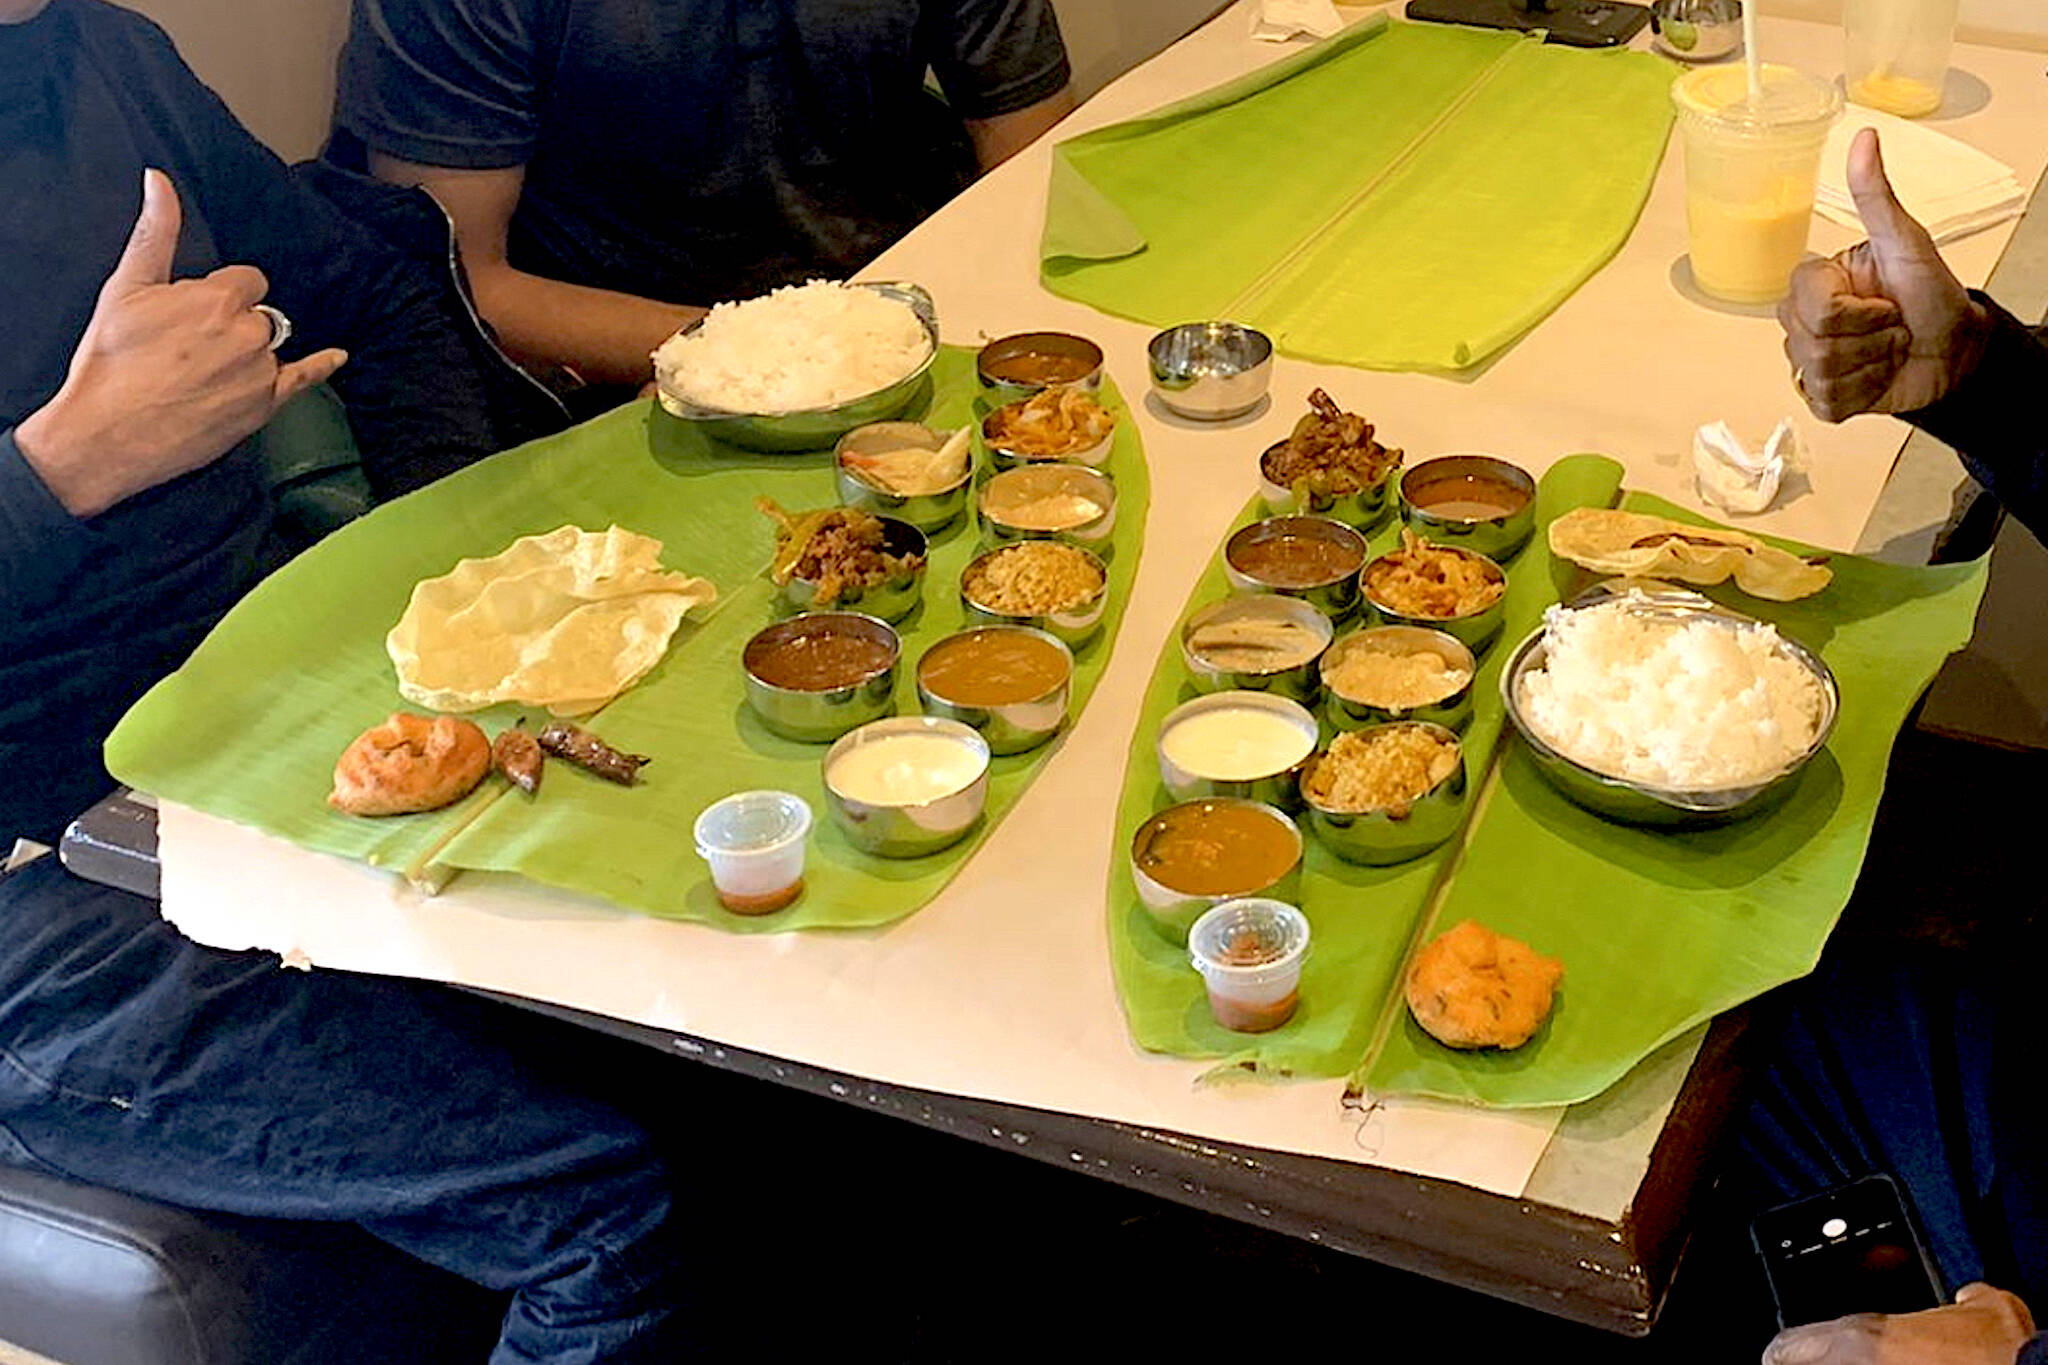 Why You Should Eat and Cook in Banana Leaves